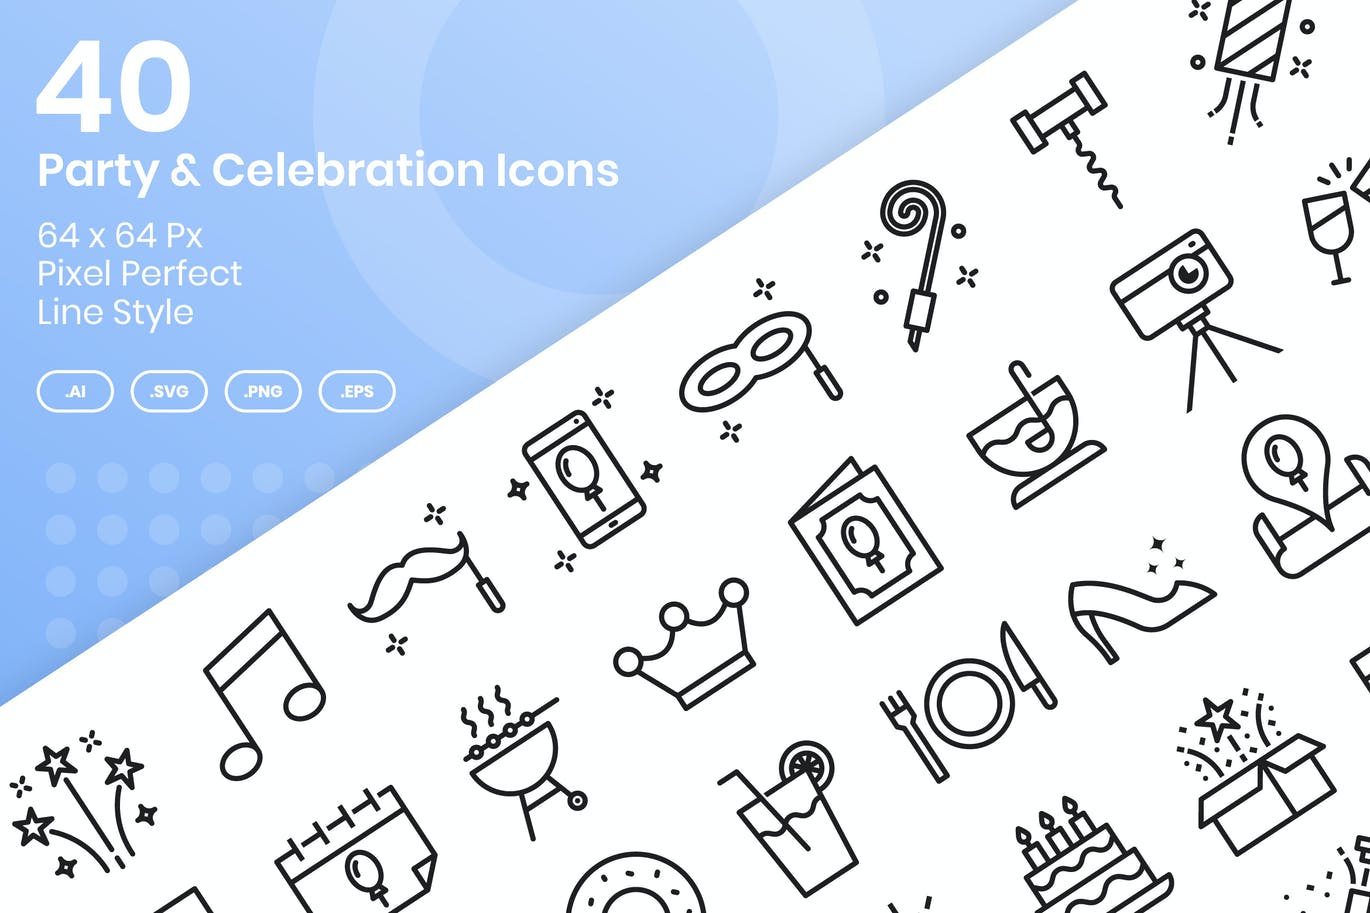 Party and celebration icons set